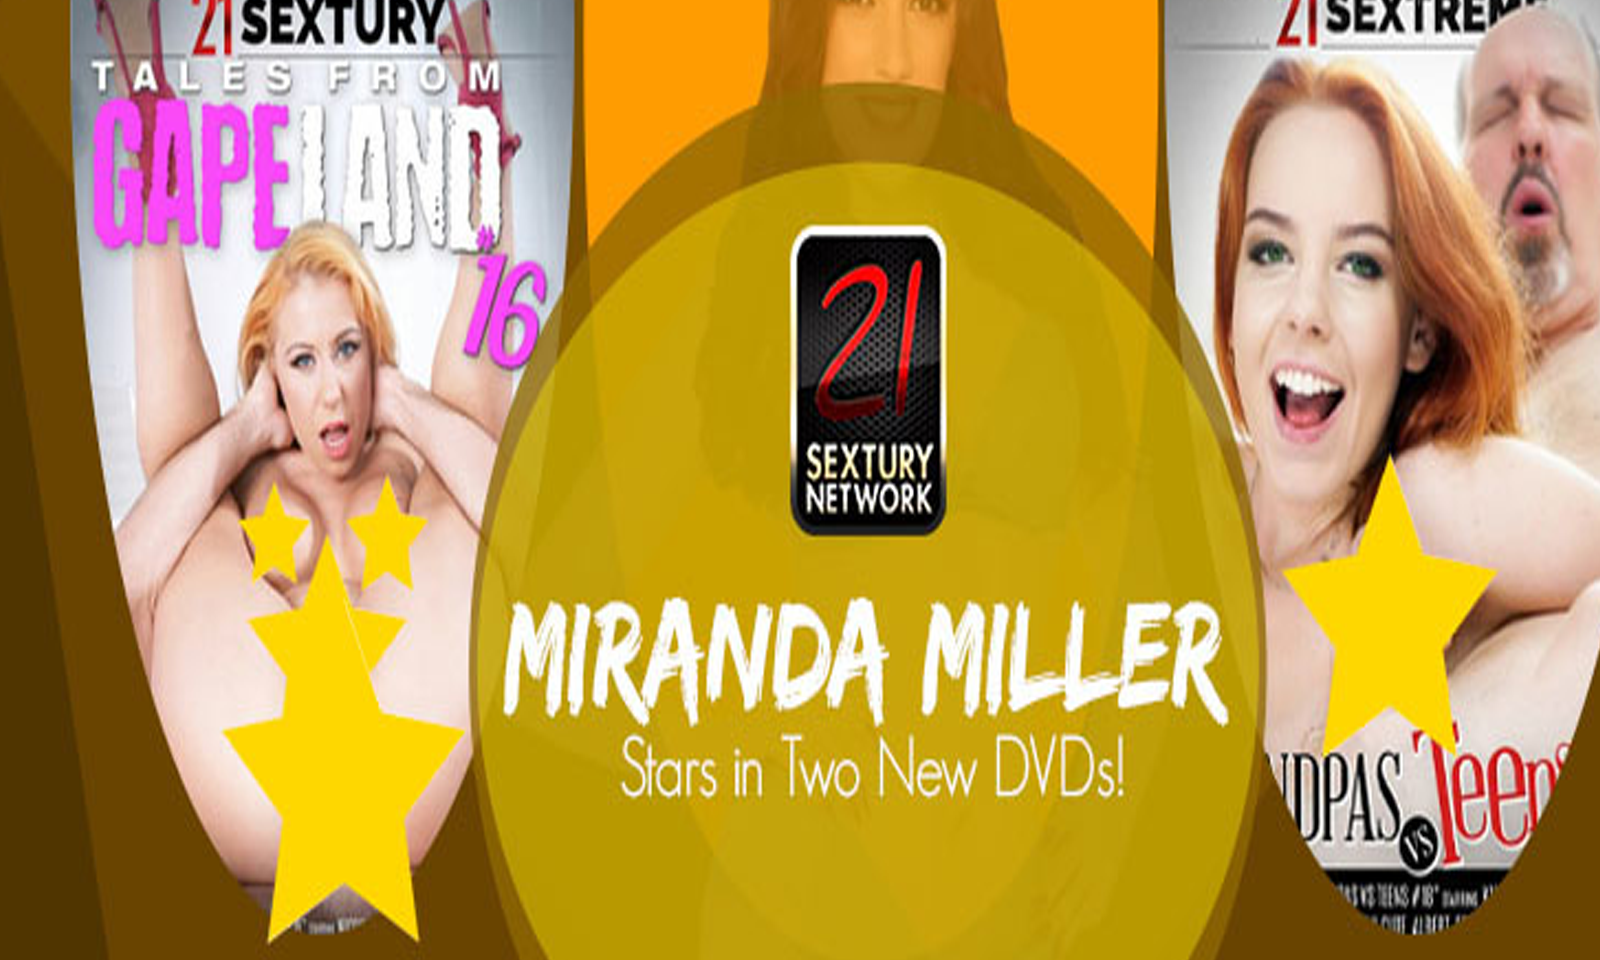 Miranda Miller Stars in Two New Movies From 21 Sextury